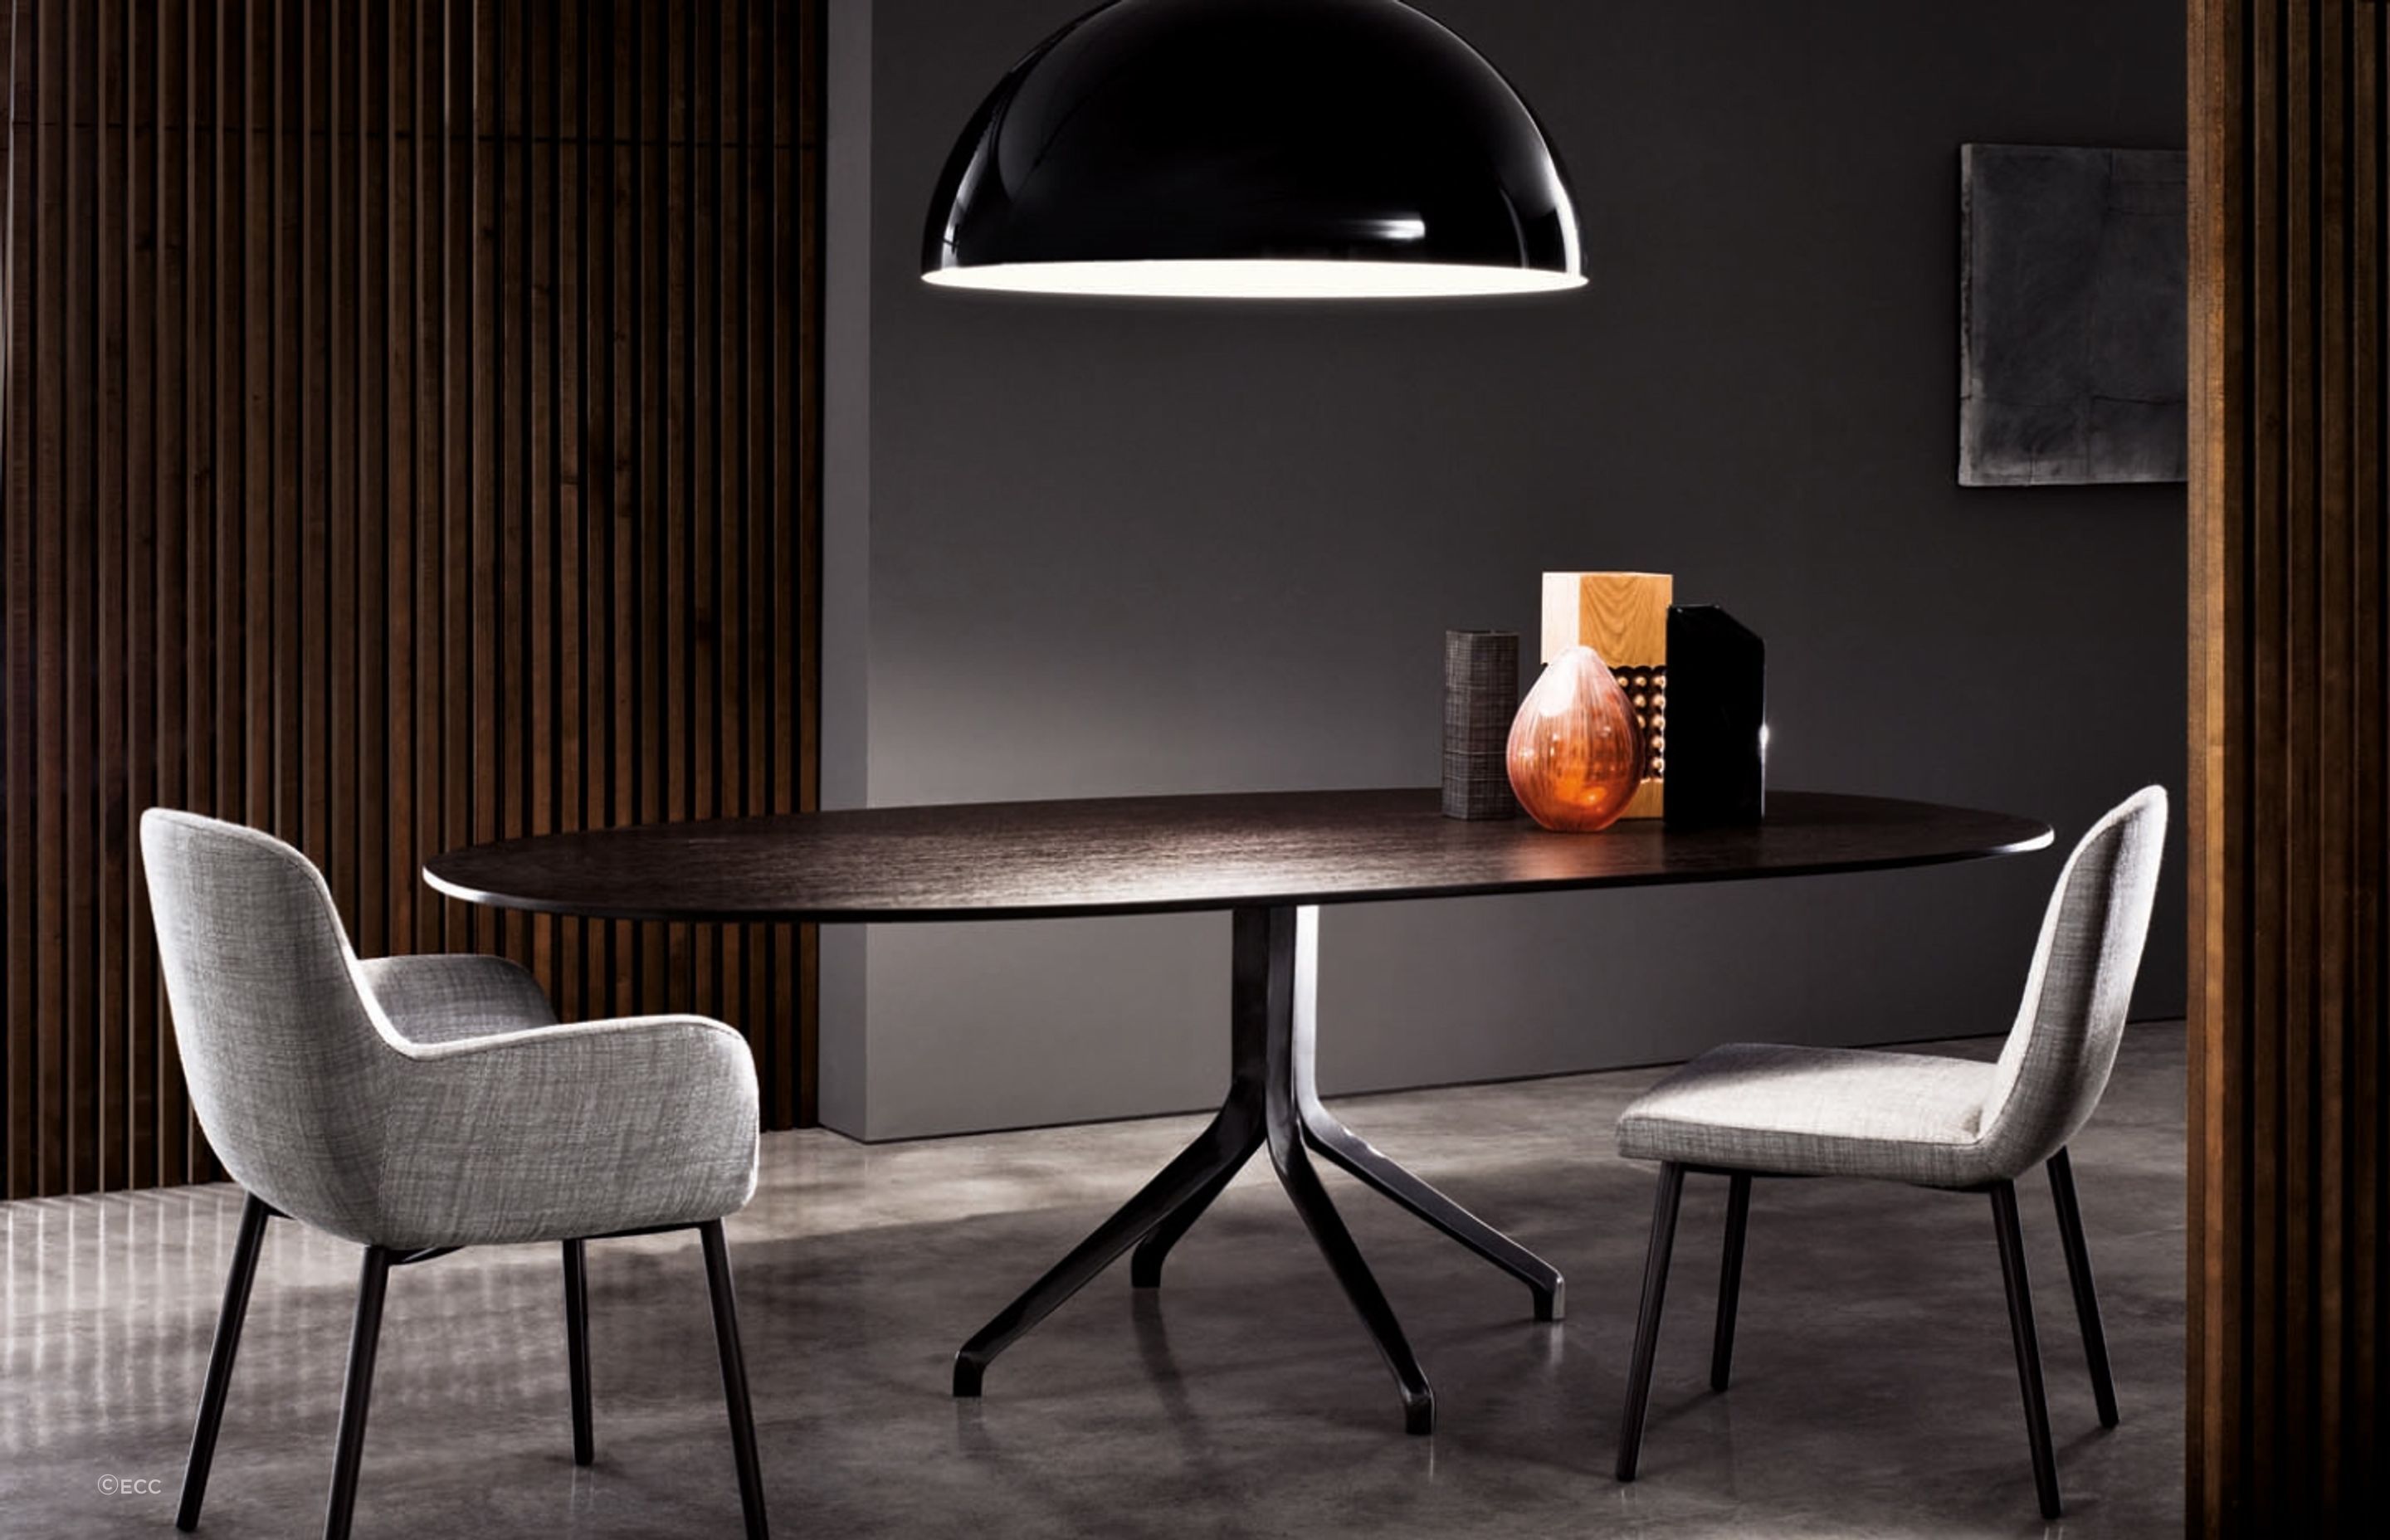 A bold choice like the Sonora Pendant By Oluce can really draw the eye.